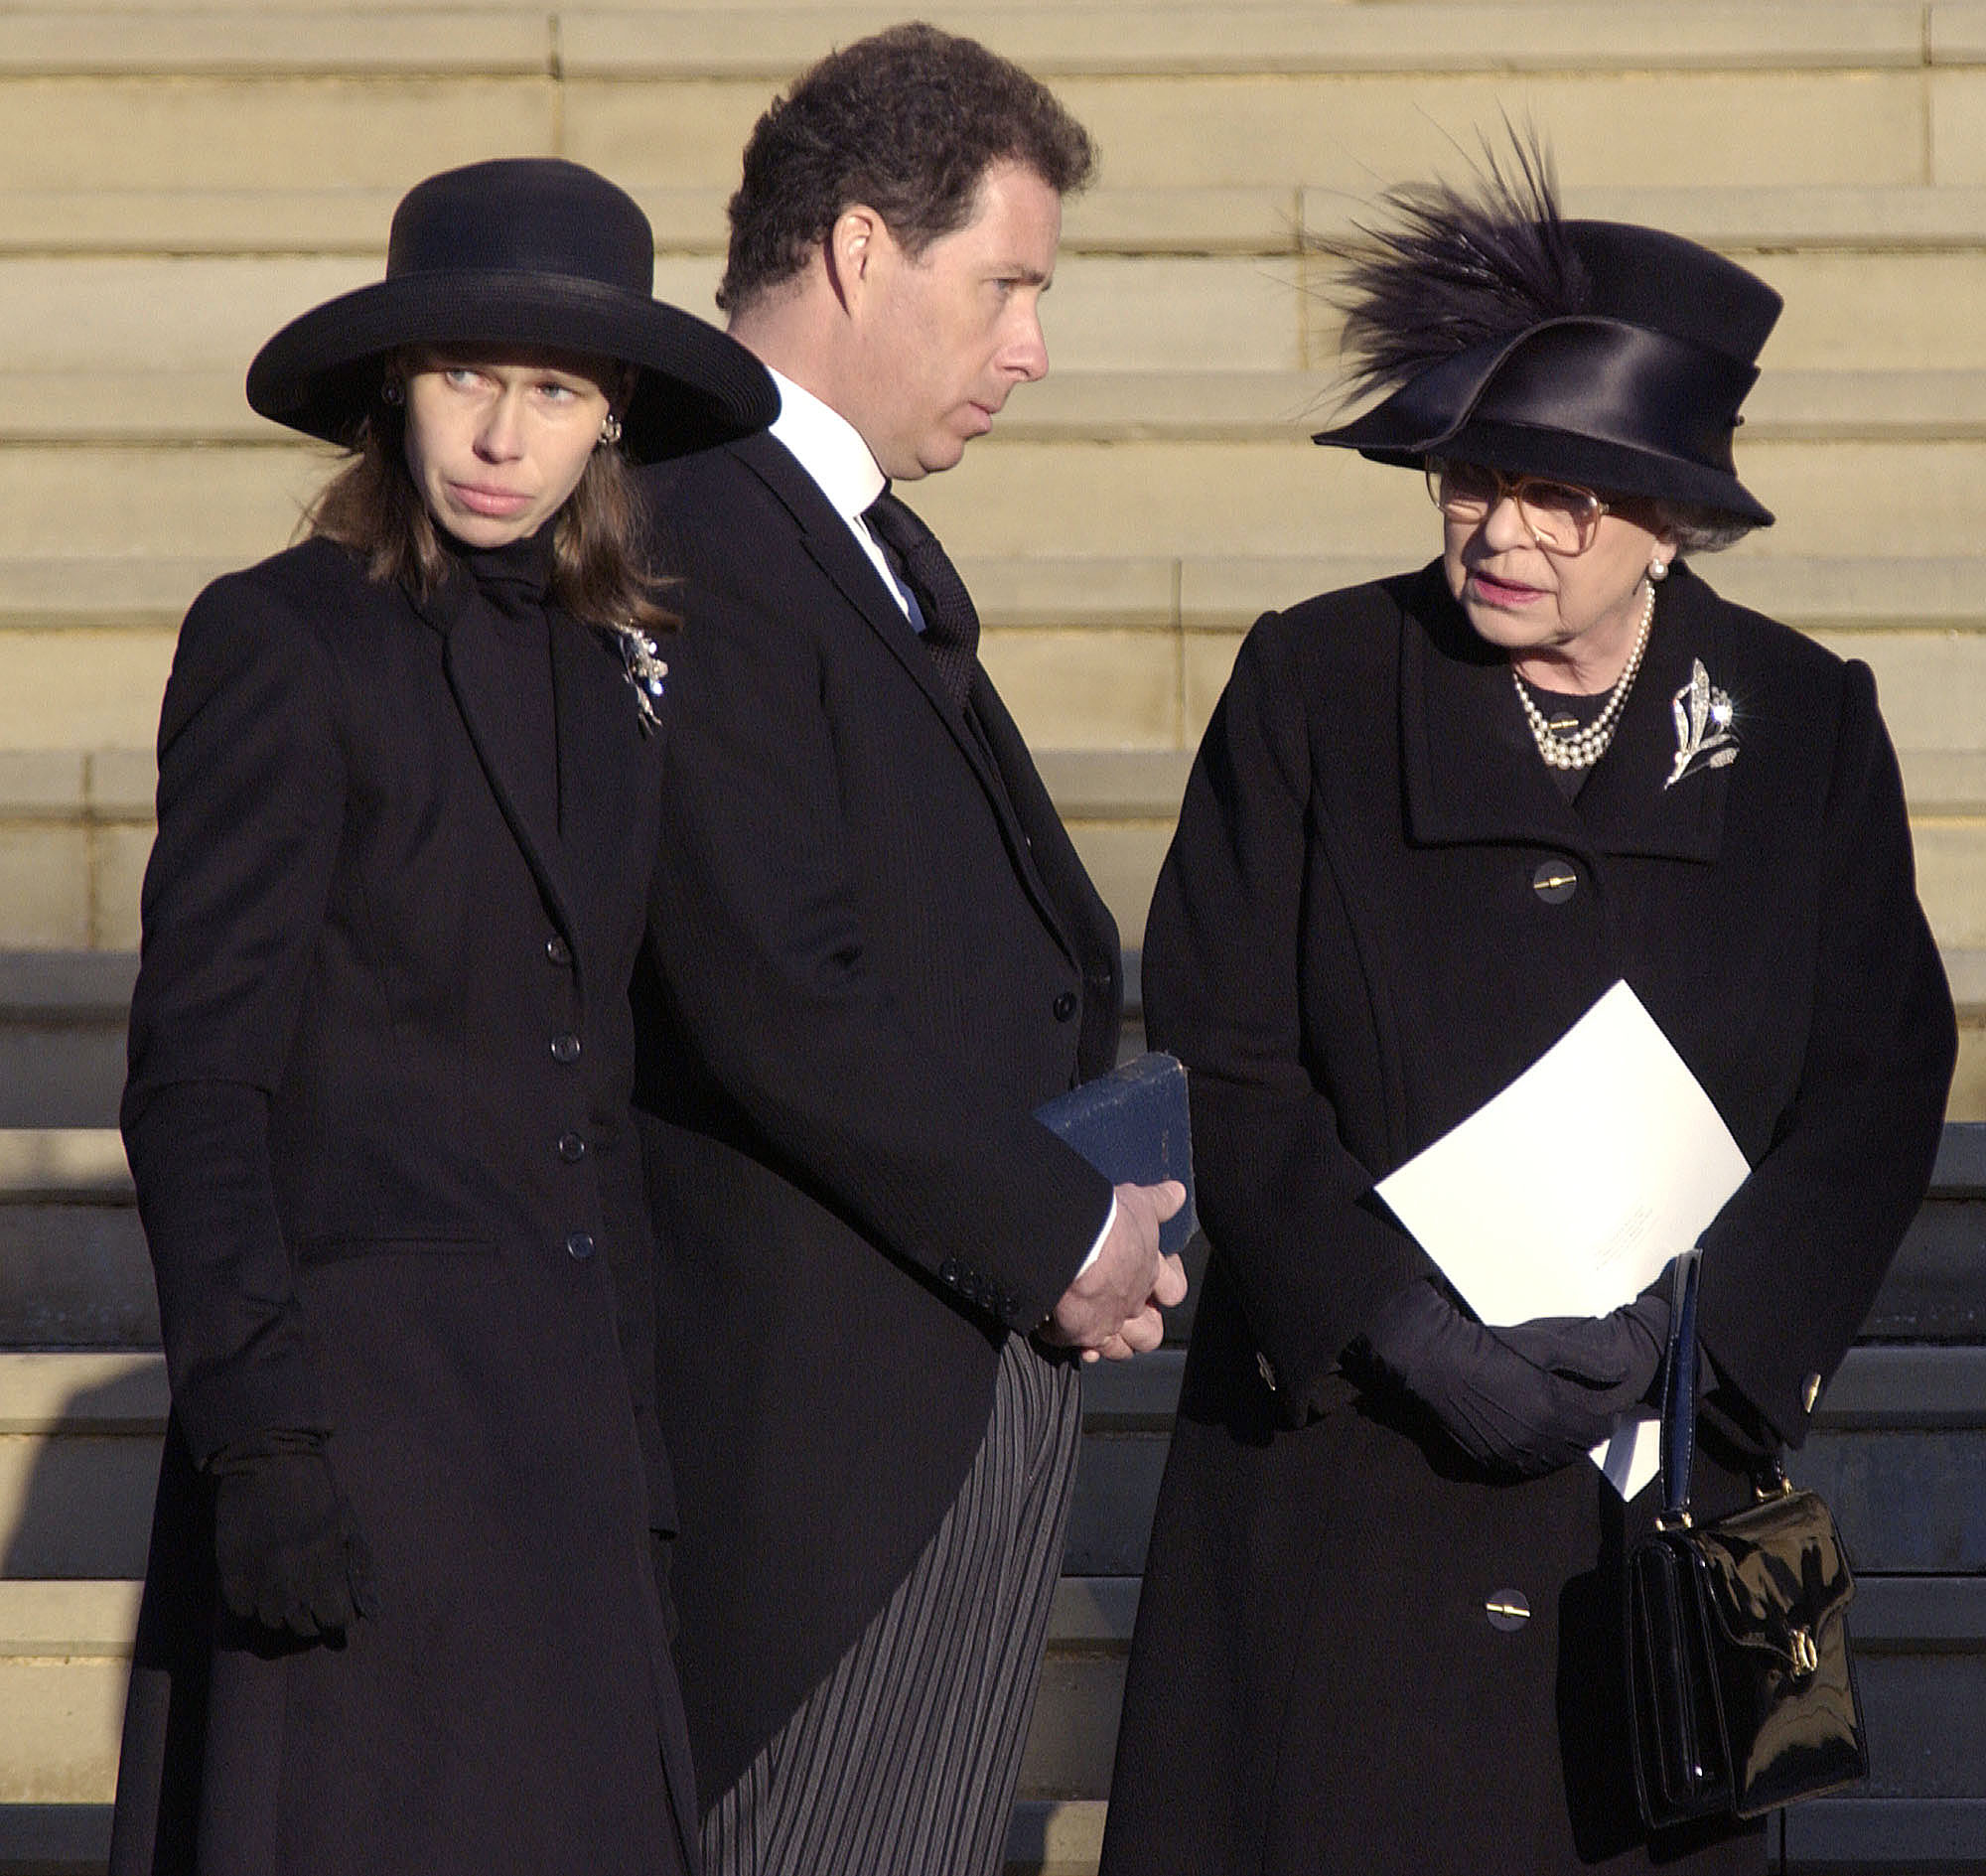 Princess Margaret's son and daughter at her funeral with Queen Elizabeth II